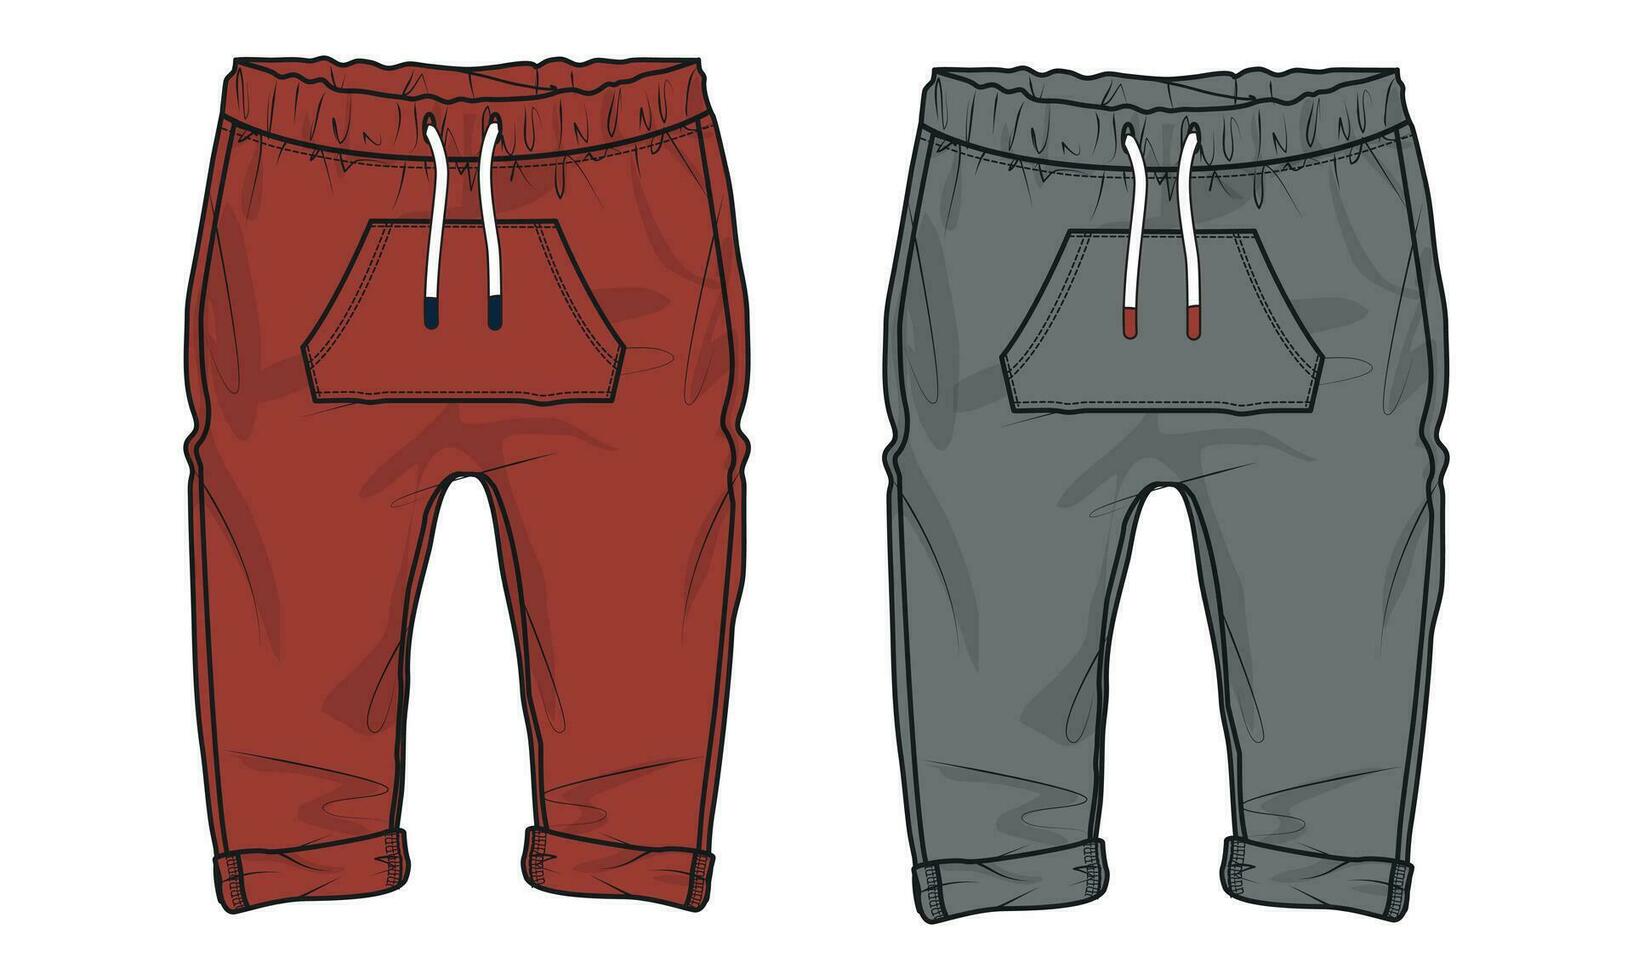 Sweatpants technical drawing  fashion flat sketch vector illustration Red and grey color template for kids